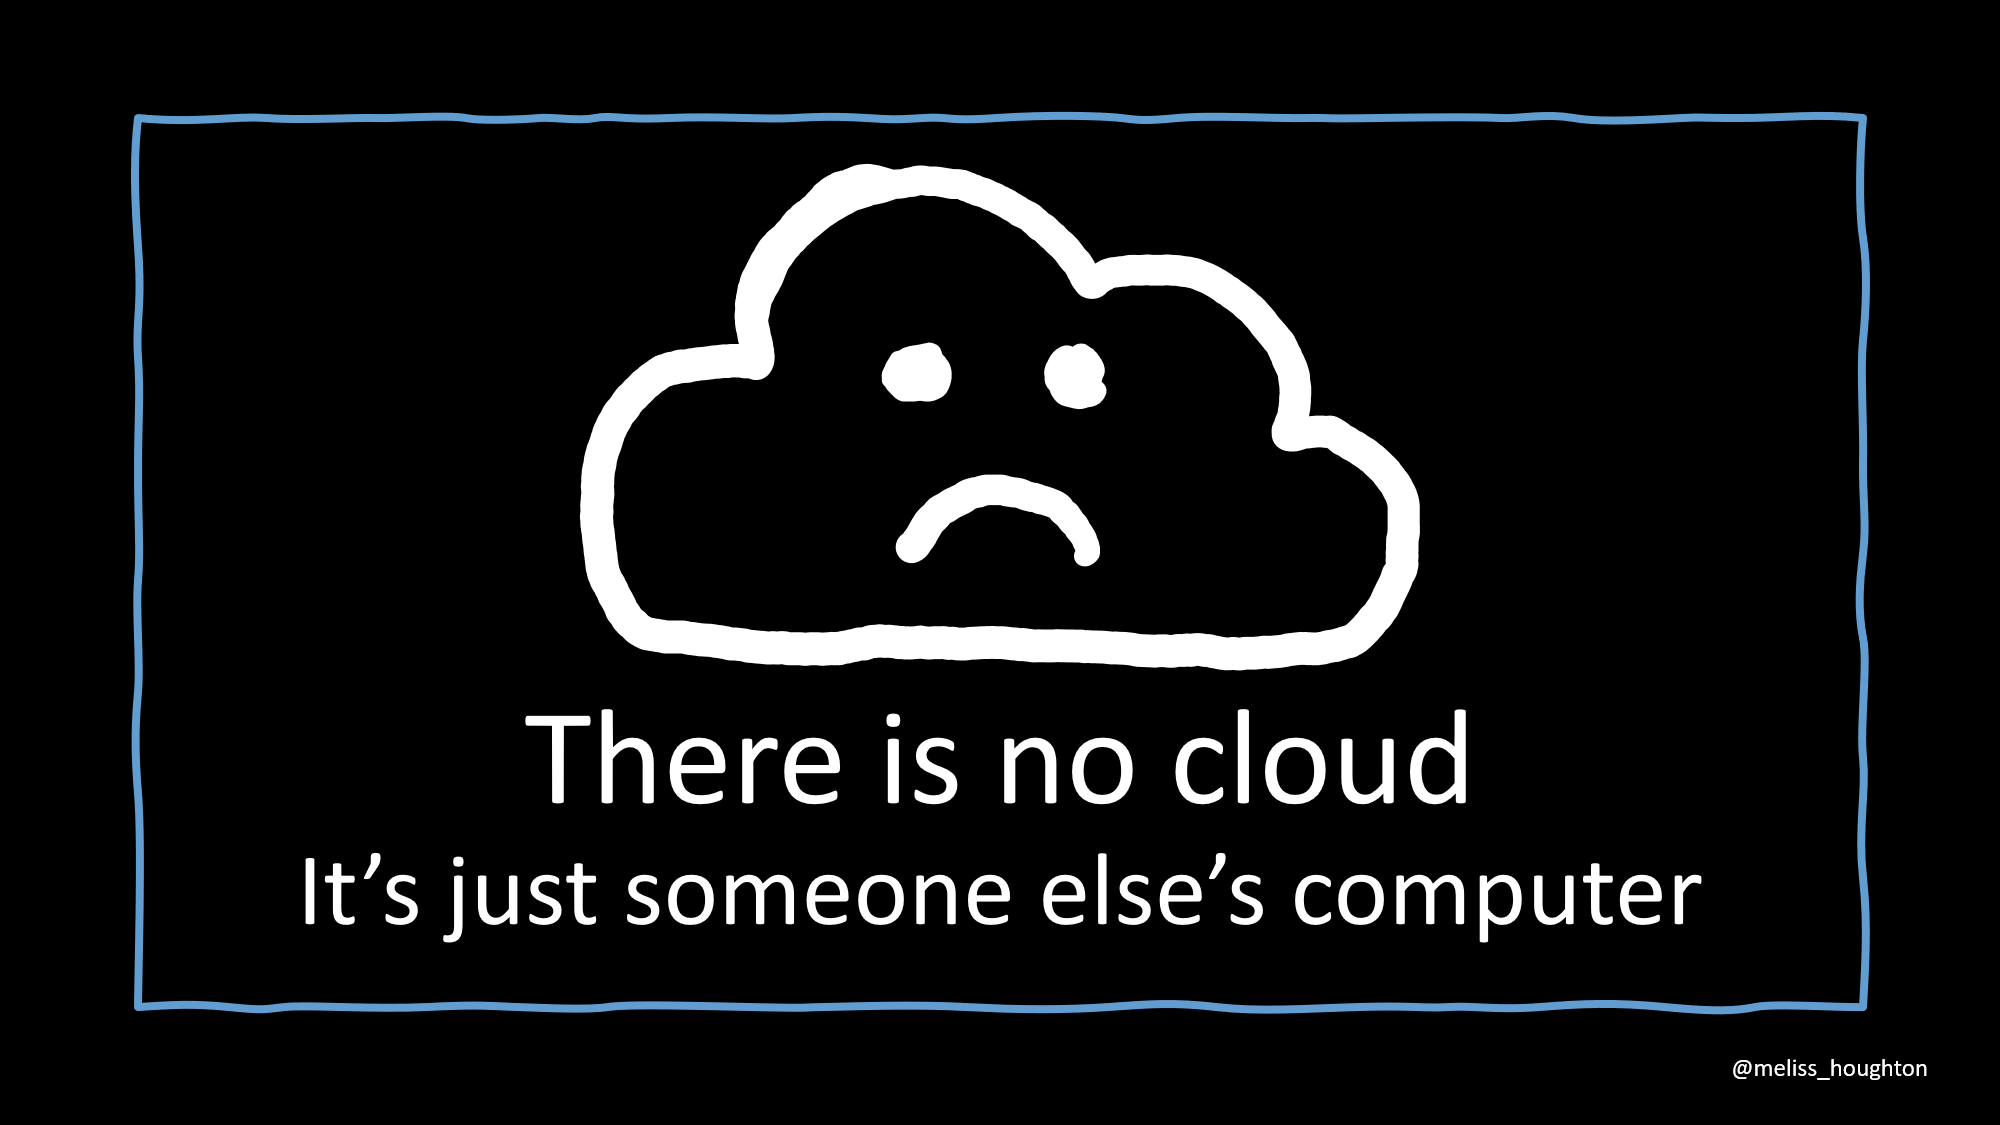 There is no cloud, it's just someone else's computer